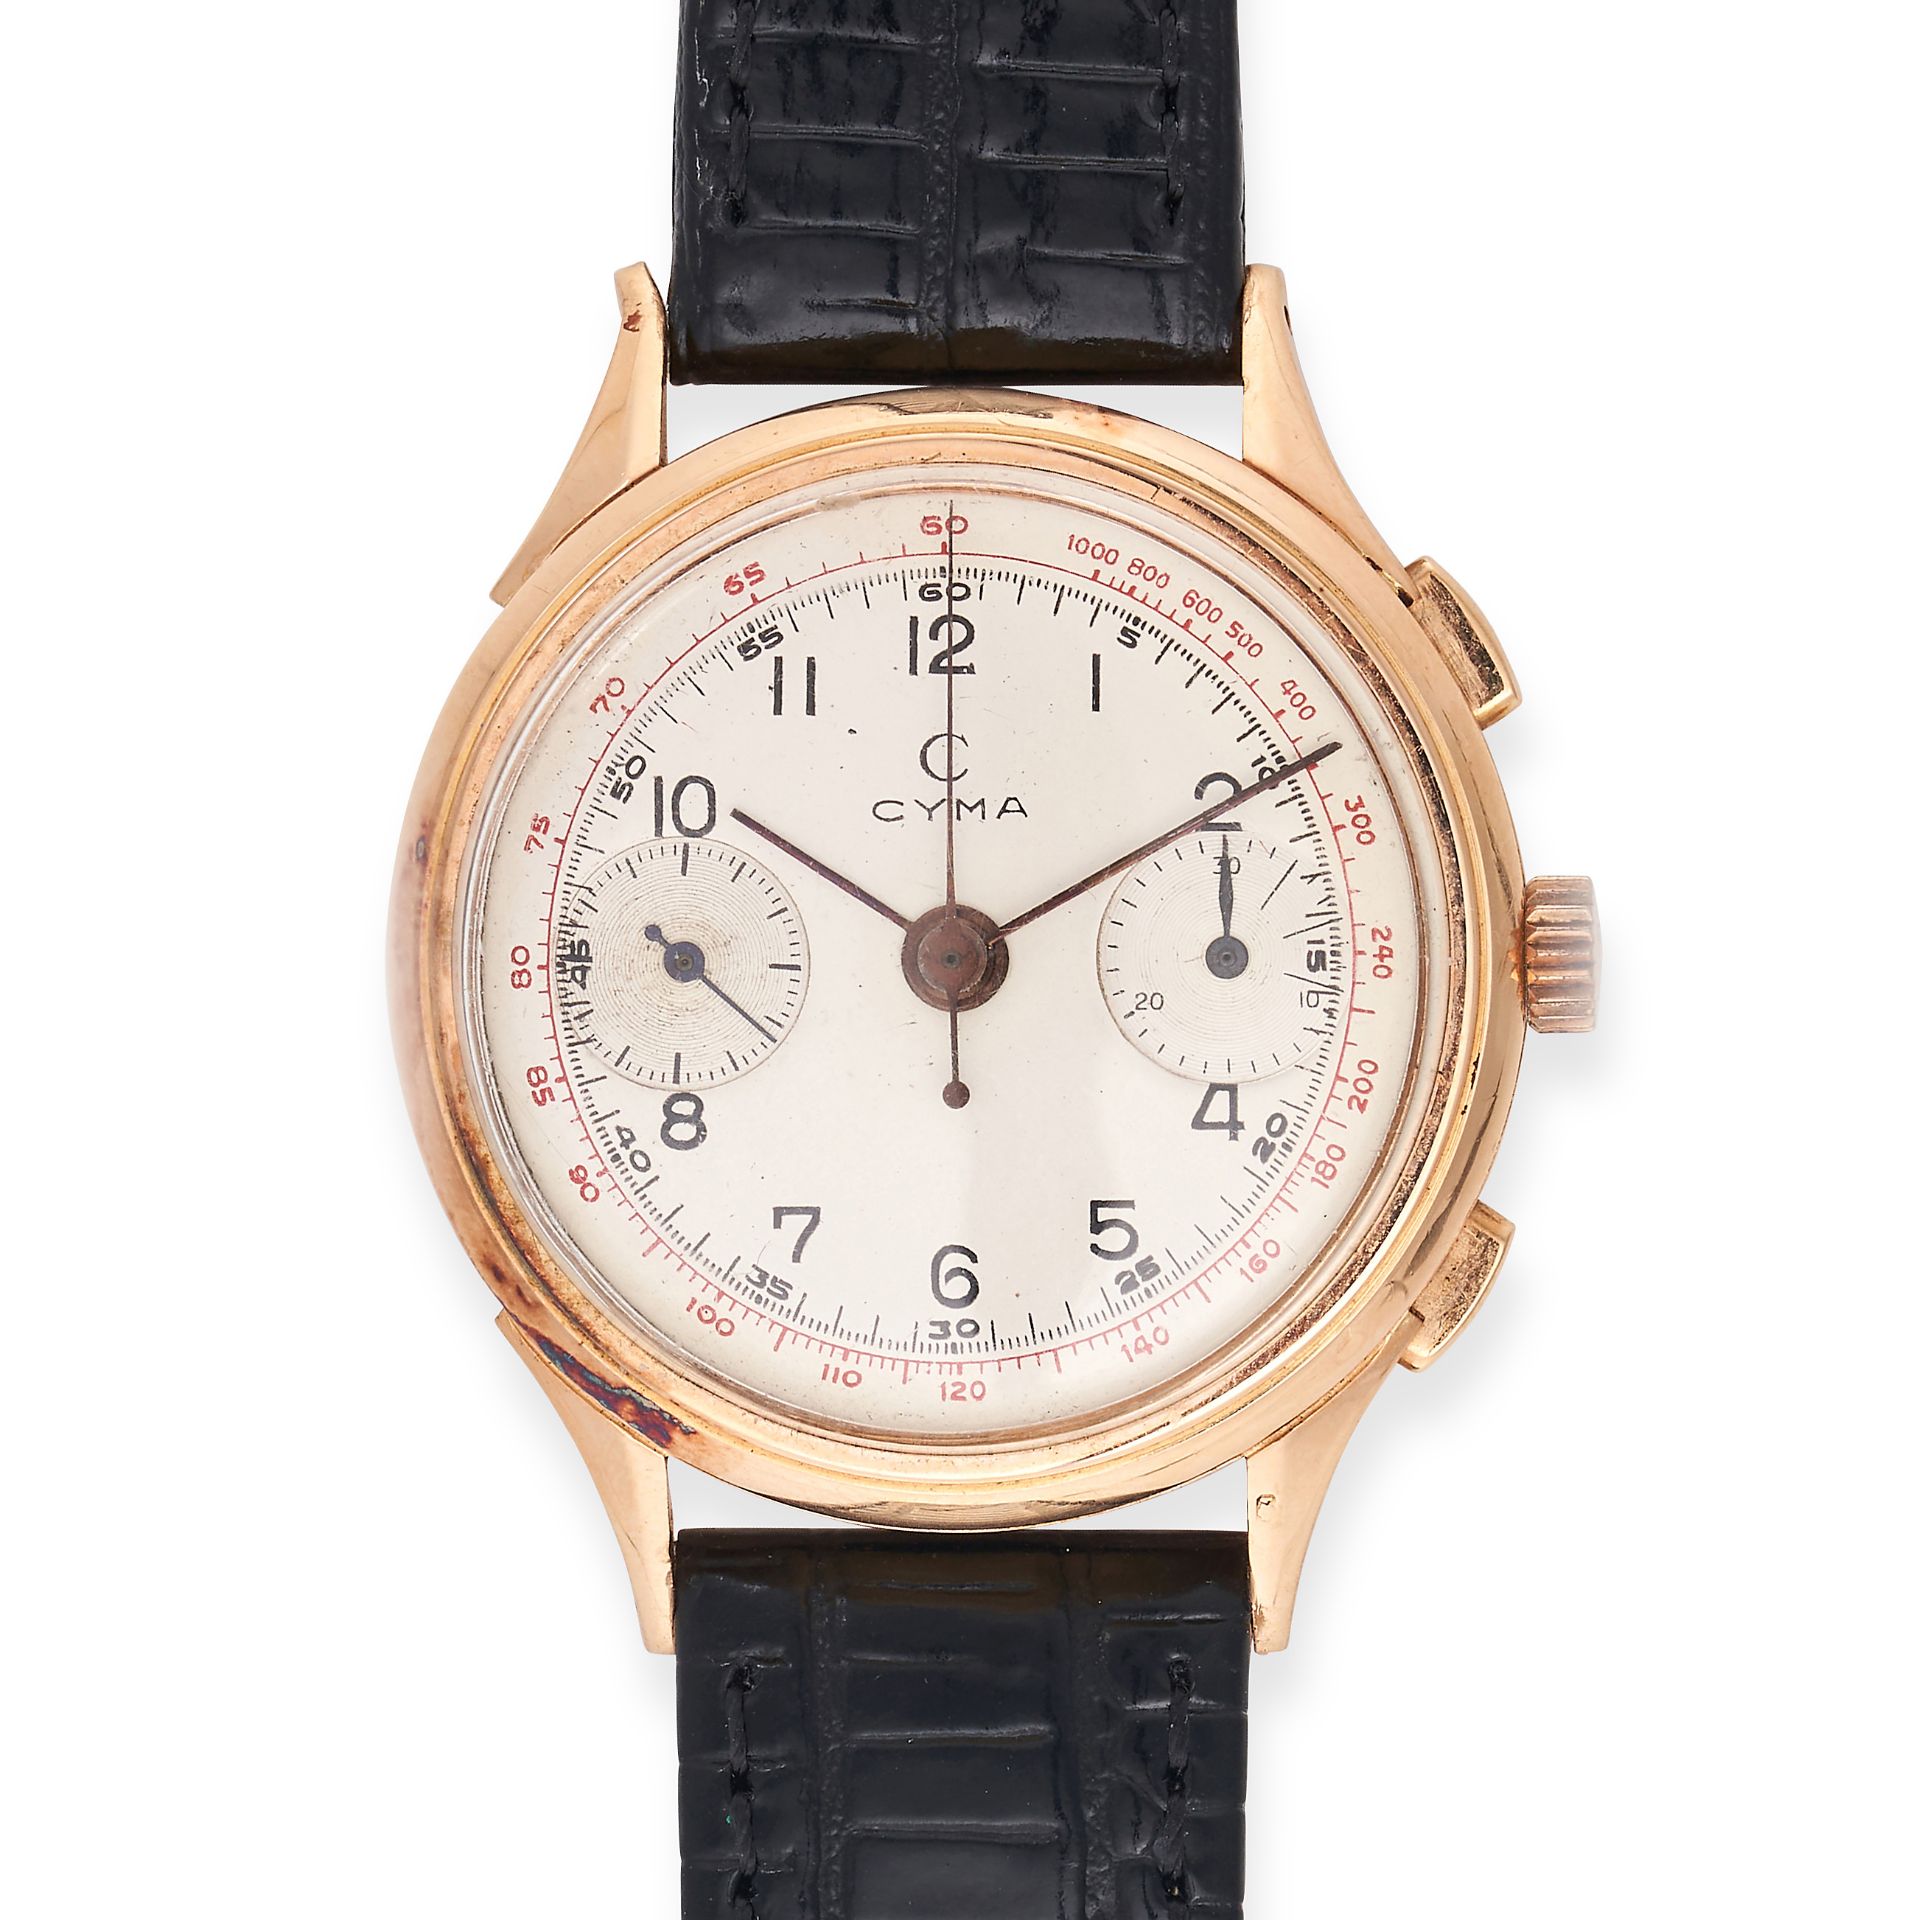 CYMA - A CYMA CHRONOGRAPH WRISTWATCH in 18ct yellow gold, 895XXX, the silvered dial with Arabic n...